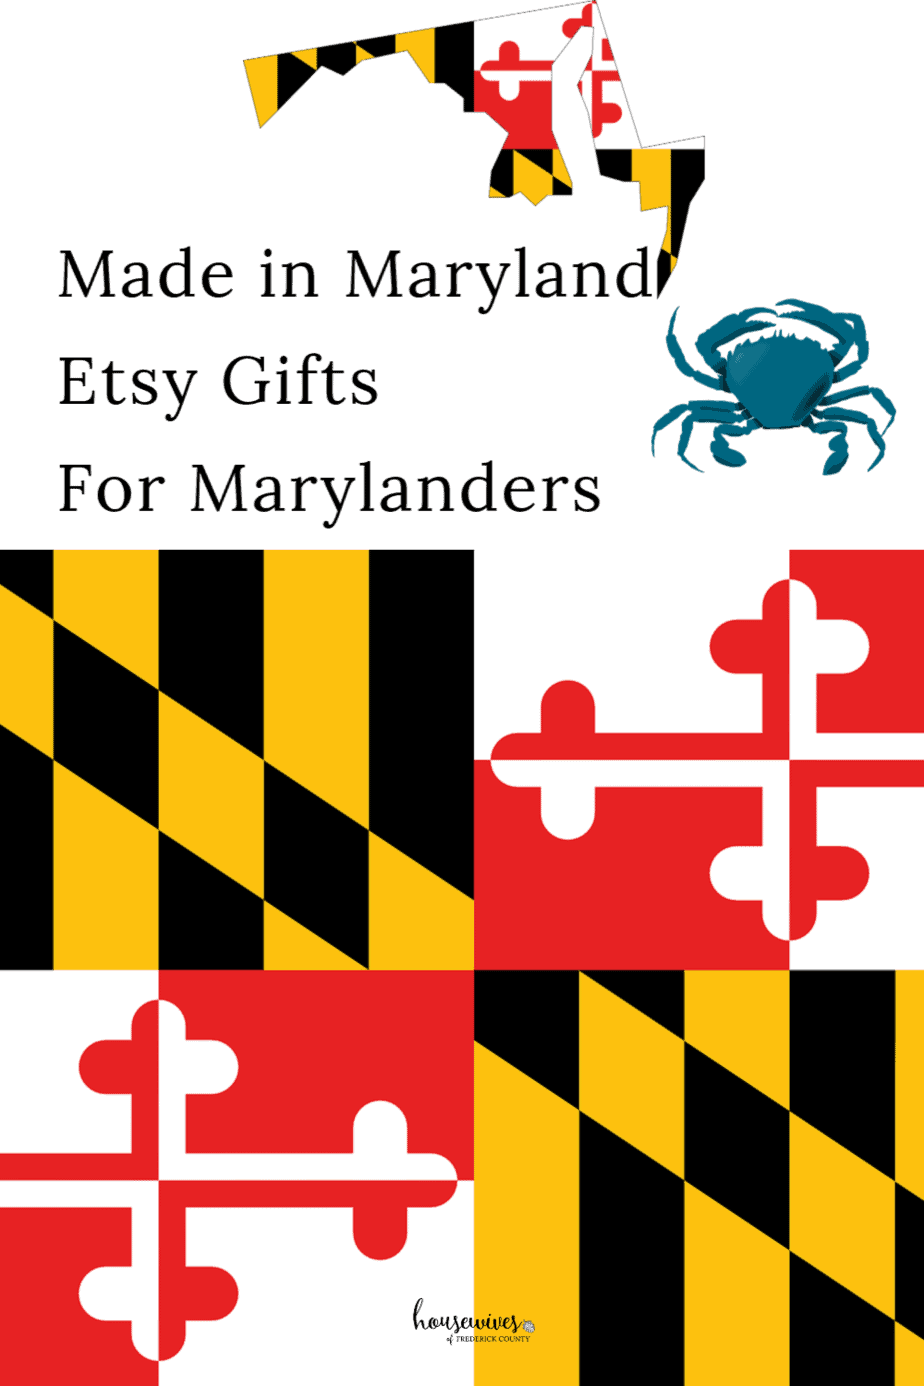 Made in Maryland Etsy